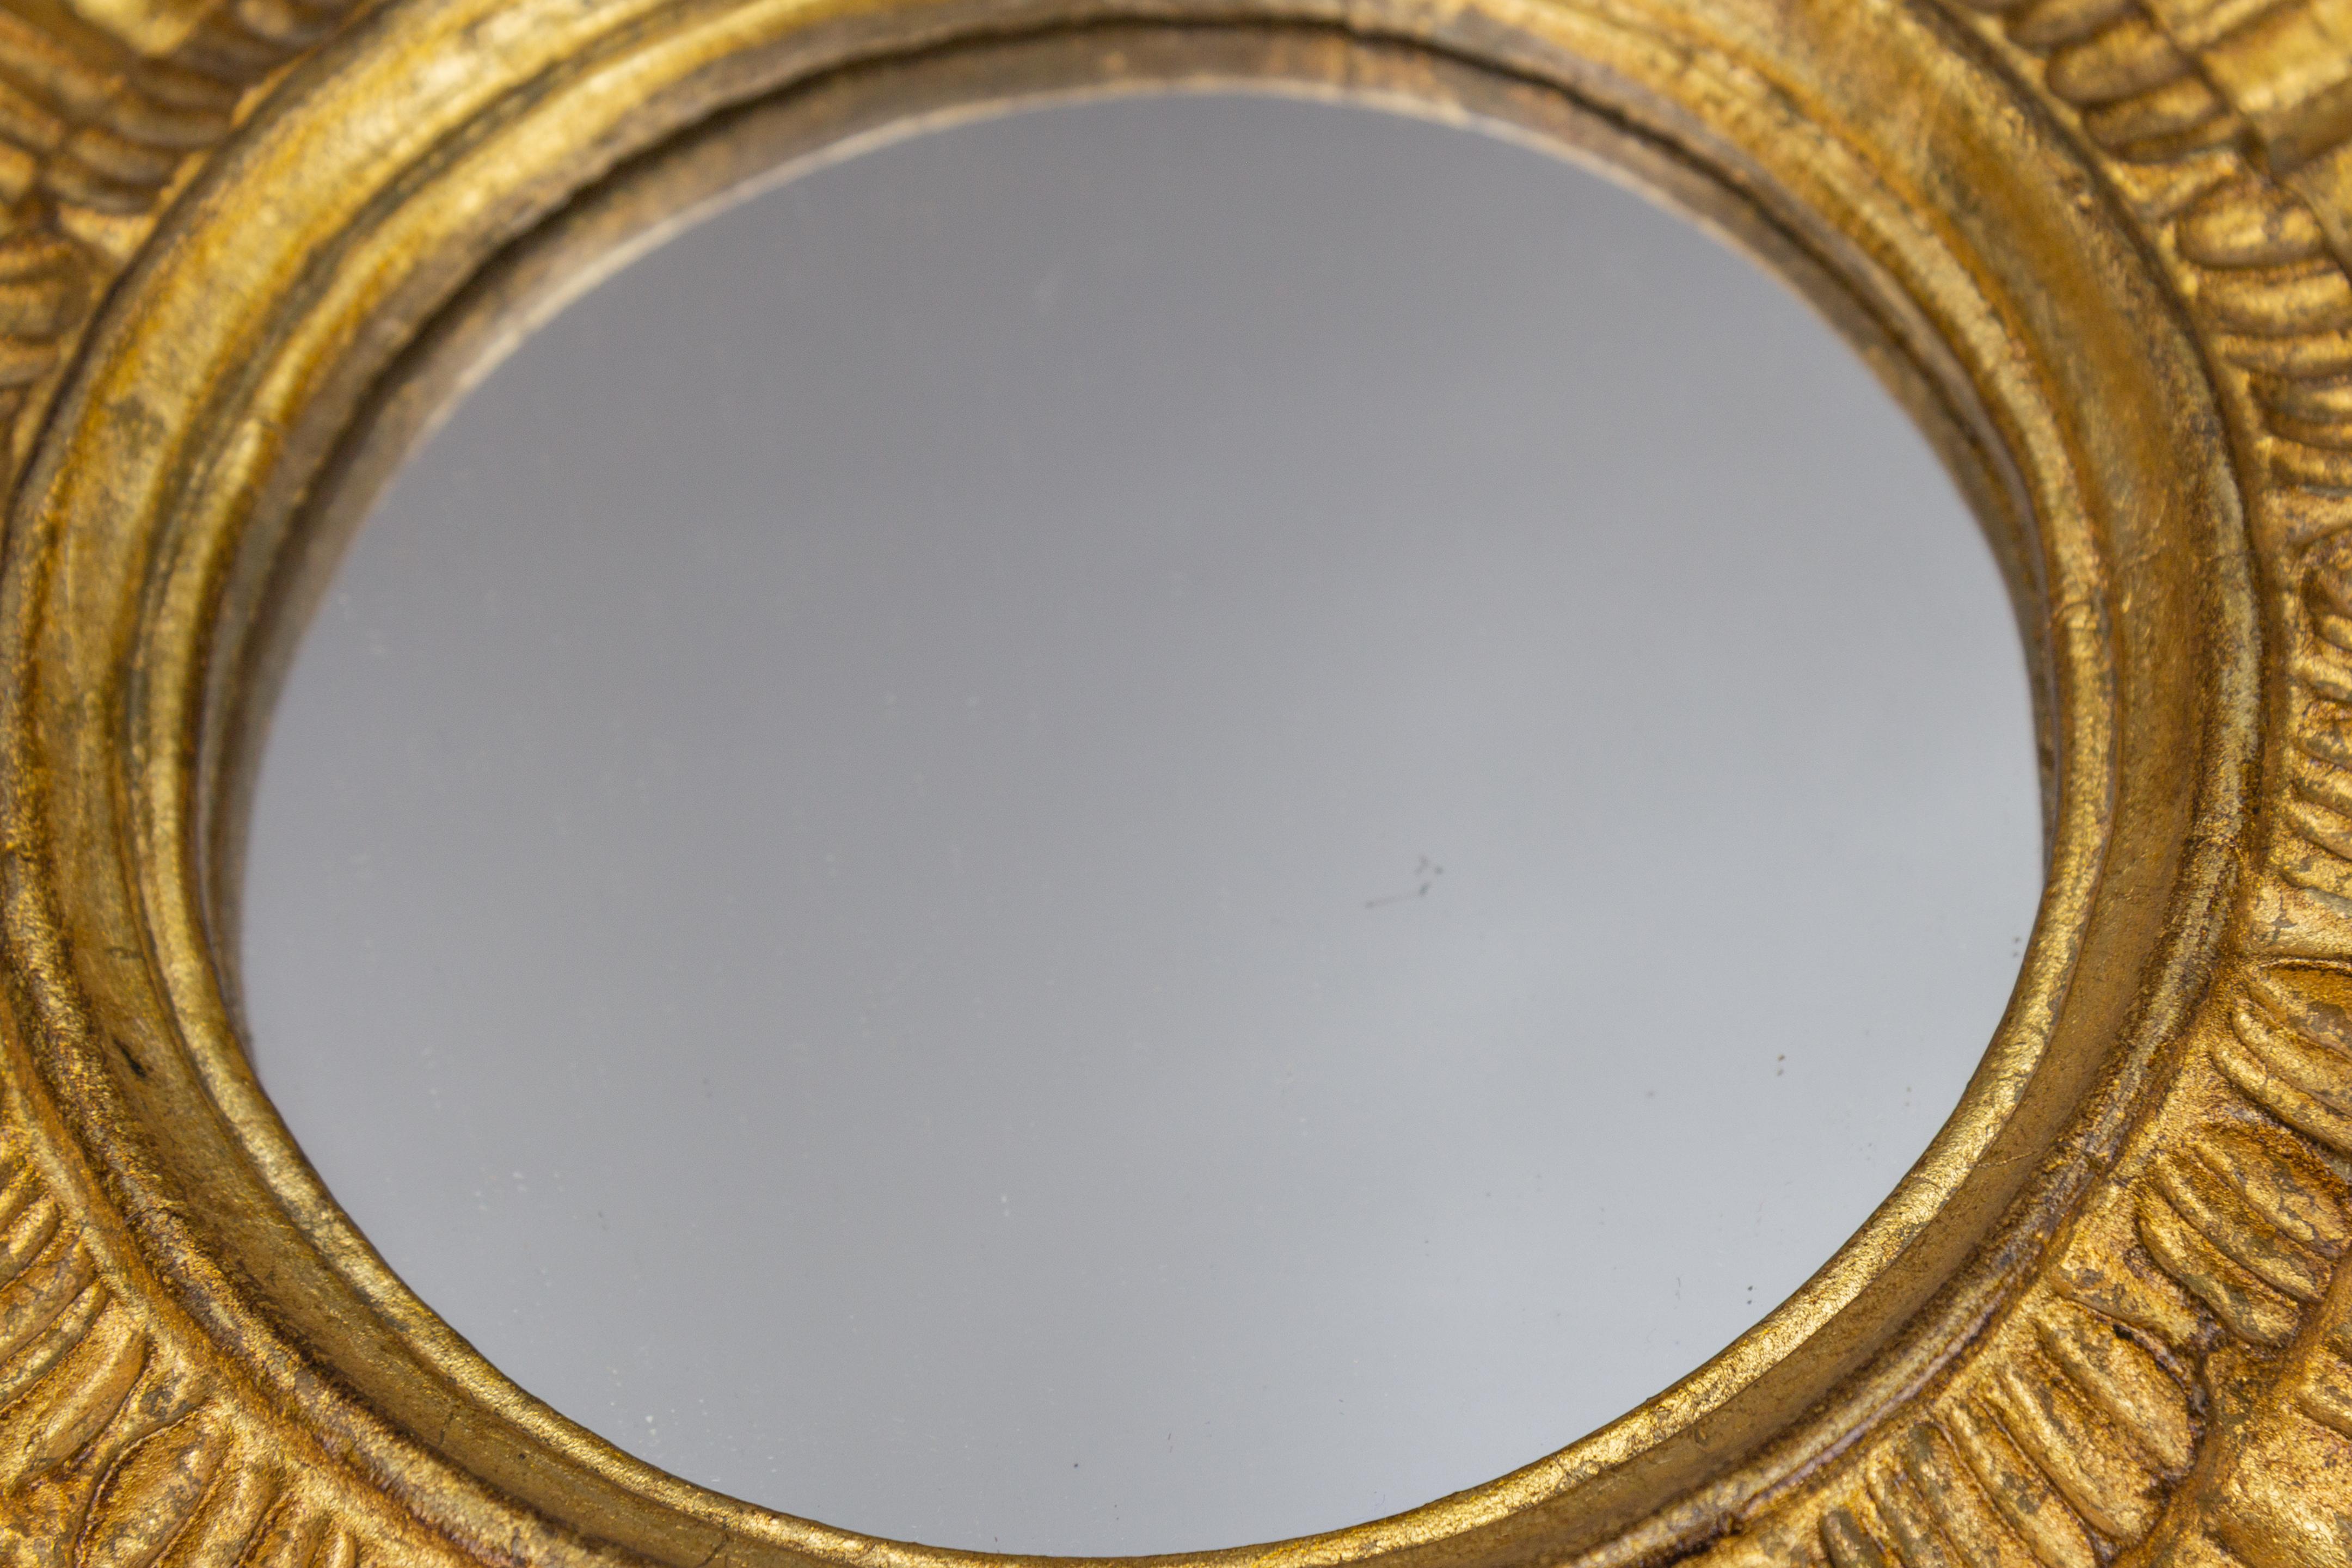 Gilt Lindenwood sunburst or sun wall mirror, Germany, the 1950s.
A beautiful Hollywood Regency-style wall mirror with a gold-plated linden wood round sun or sunburst-shaped frame.
Dimensions: height: 4 cm / 1.57 in; diameter: 44 cm / 17.32 in.
In